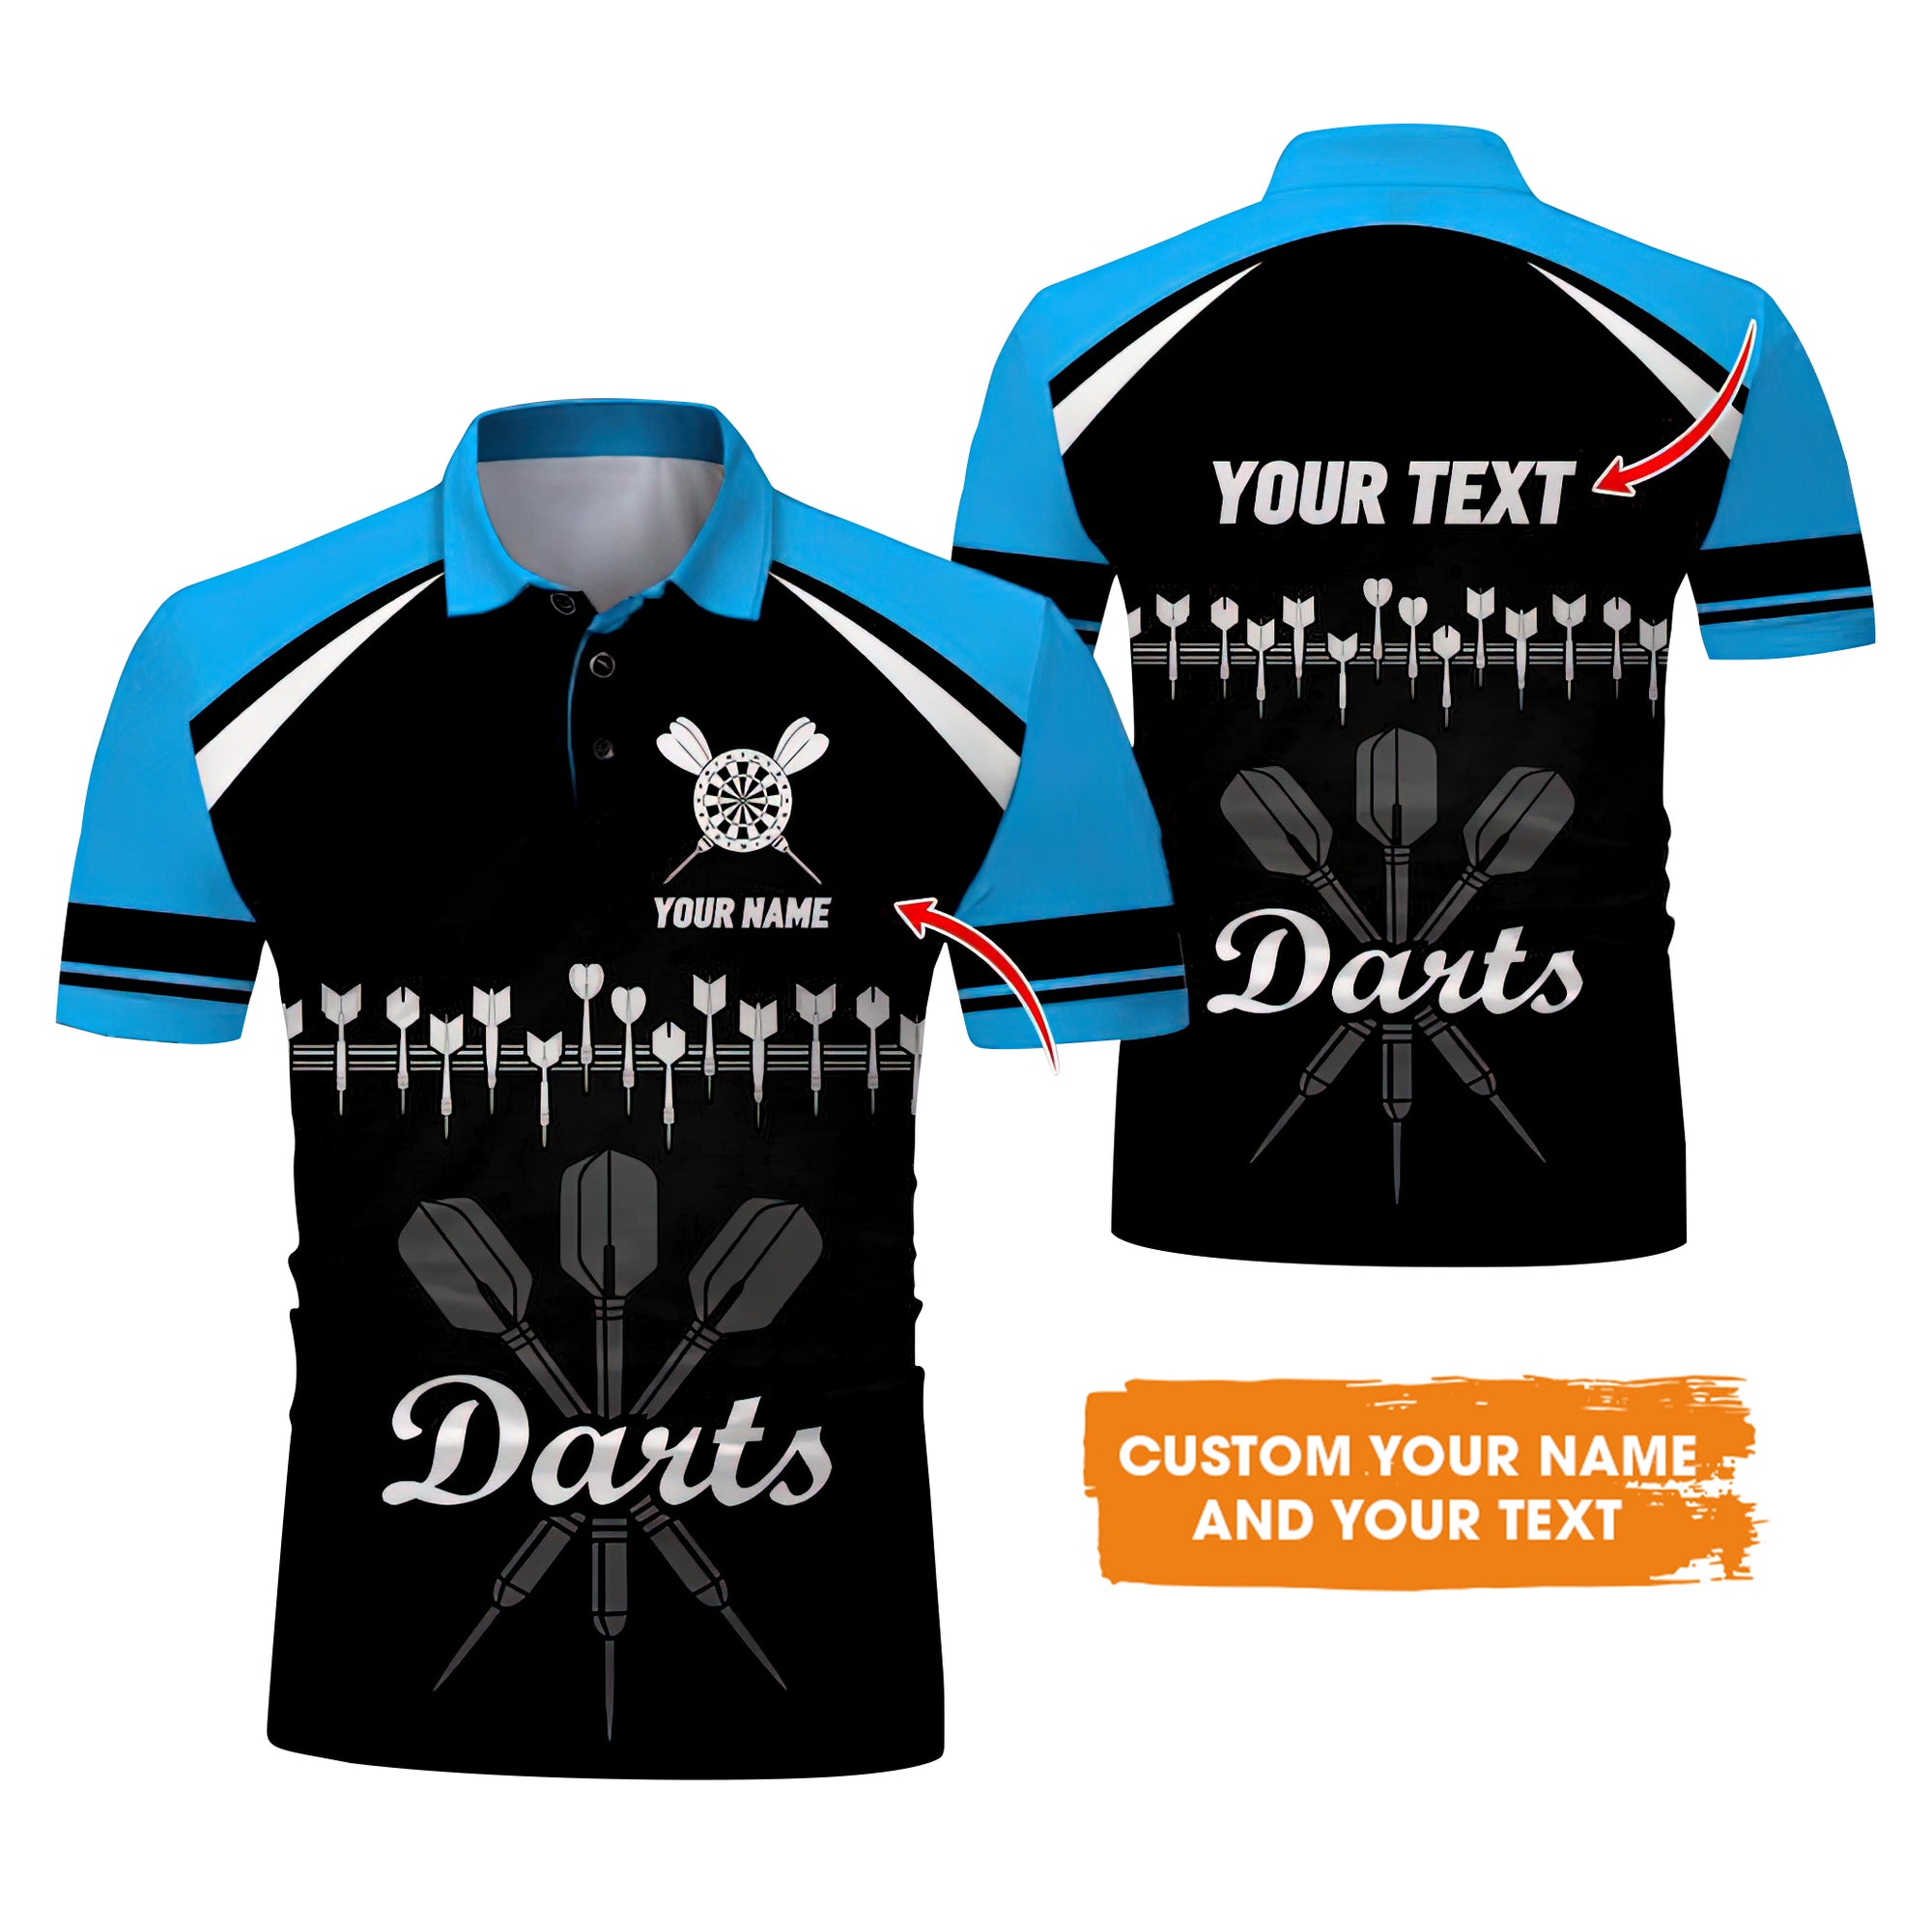 Customized Name & Text Darts Polo Shirt, Personalized Darts Team Blue Polo Shirt - Perfect Gift For Darts Lovers